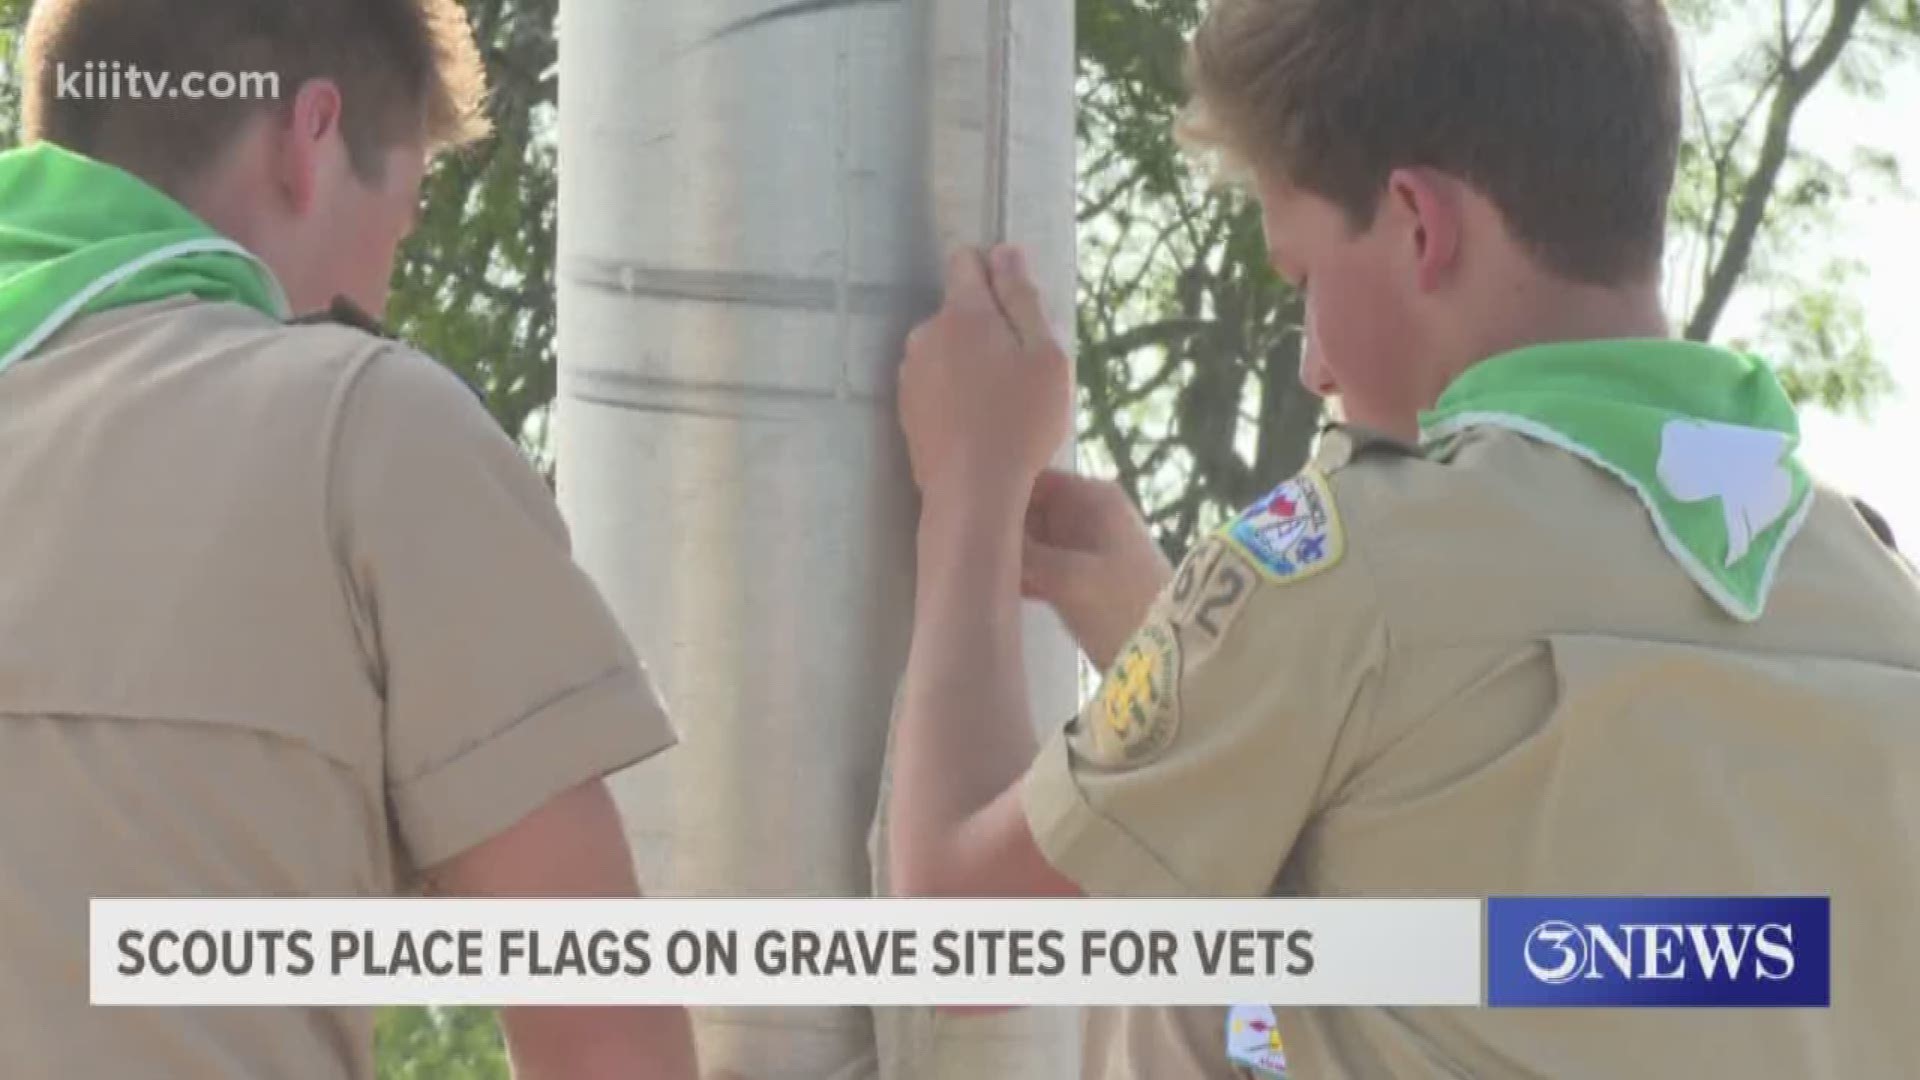 The decorating event kicked off with a ceremonial flag raising before the scouts set out to place the flags at the gravesites.